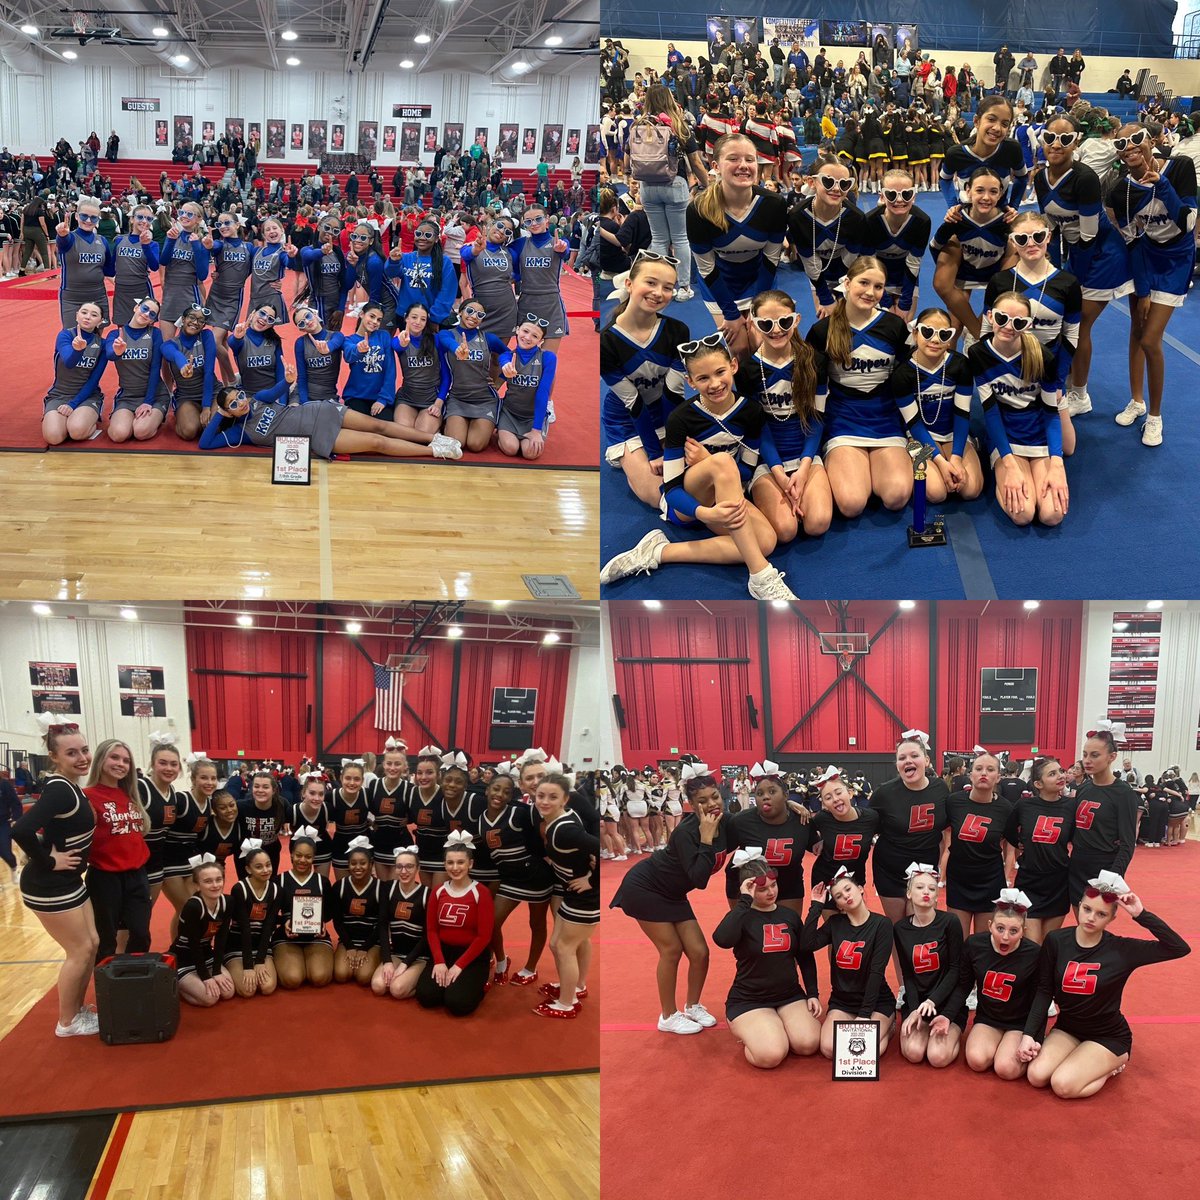 First place finishes for all four cheer teams today! 🎉#mylsps